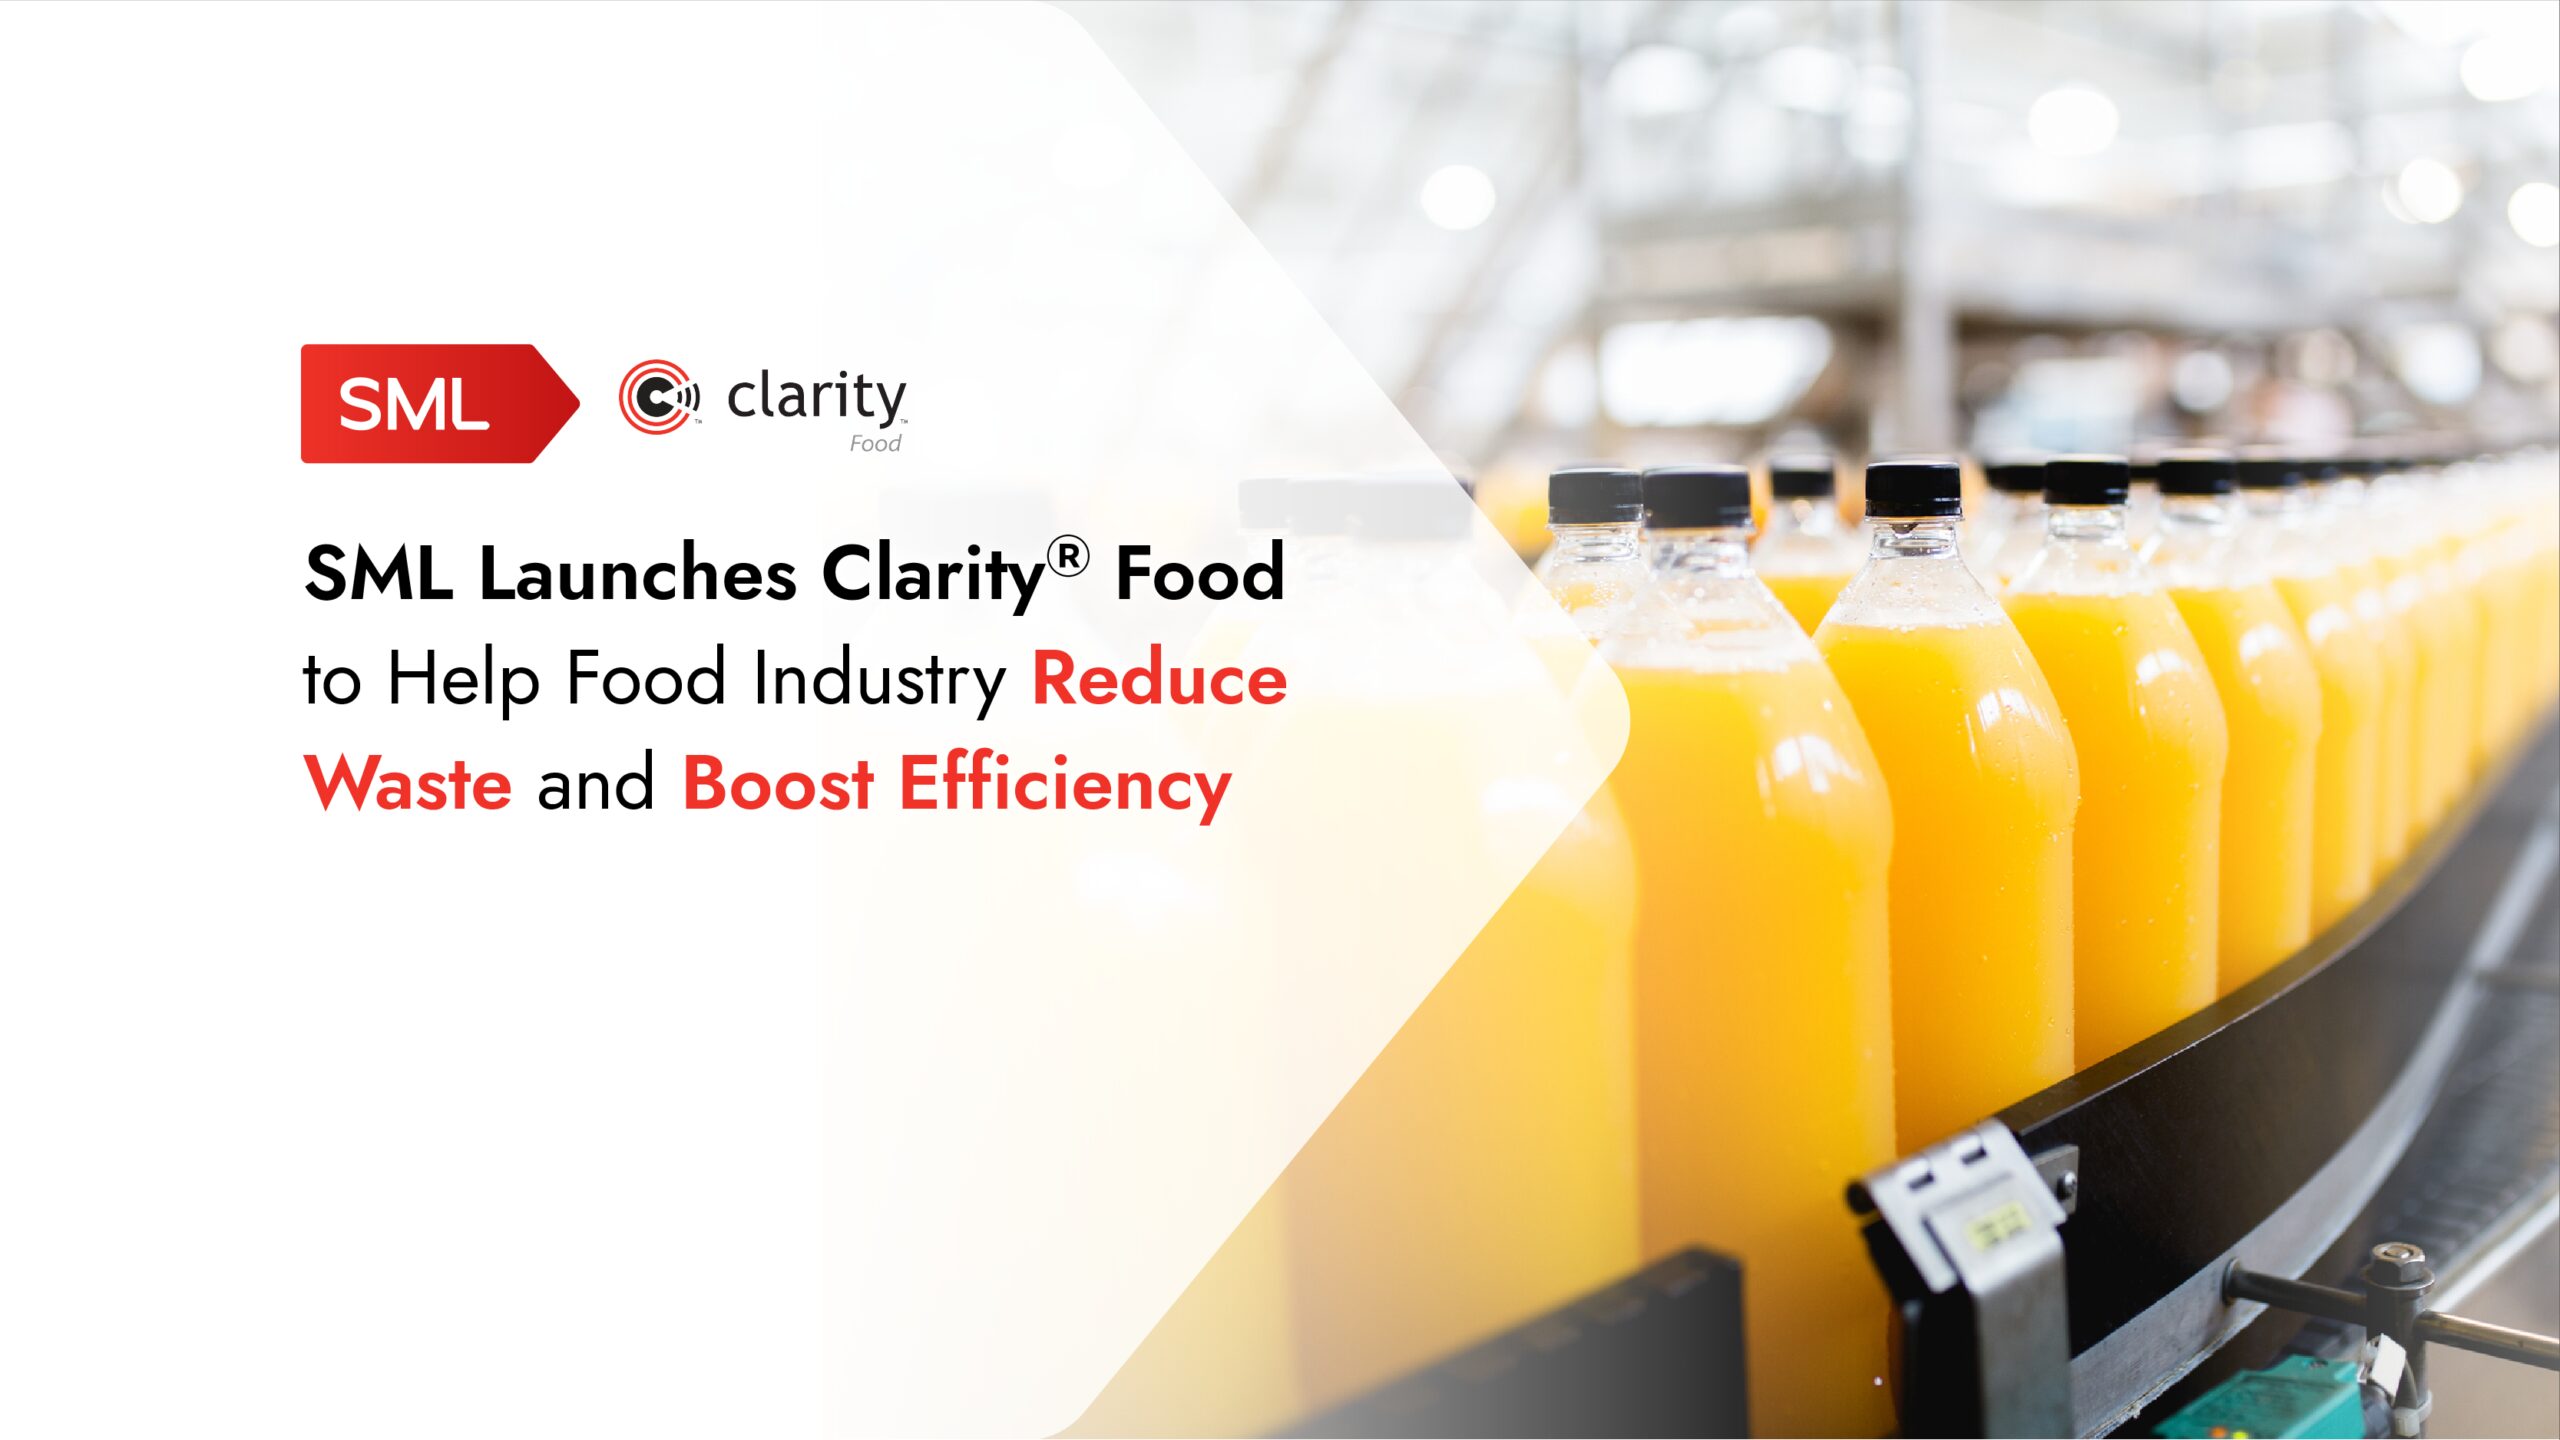 SML Launches ClarityⓇ Food to Help Food Industry Reduce Waste and Boost Efficiency